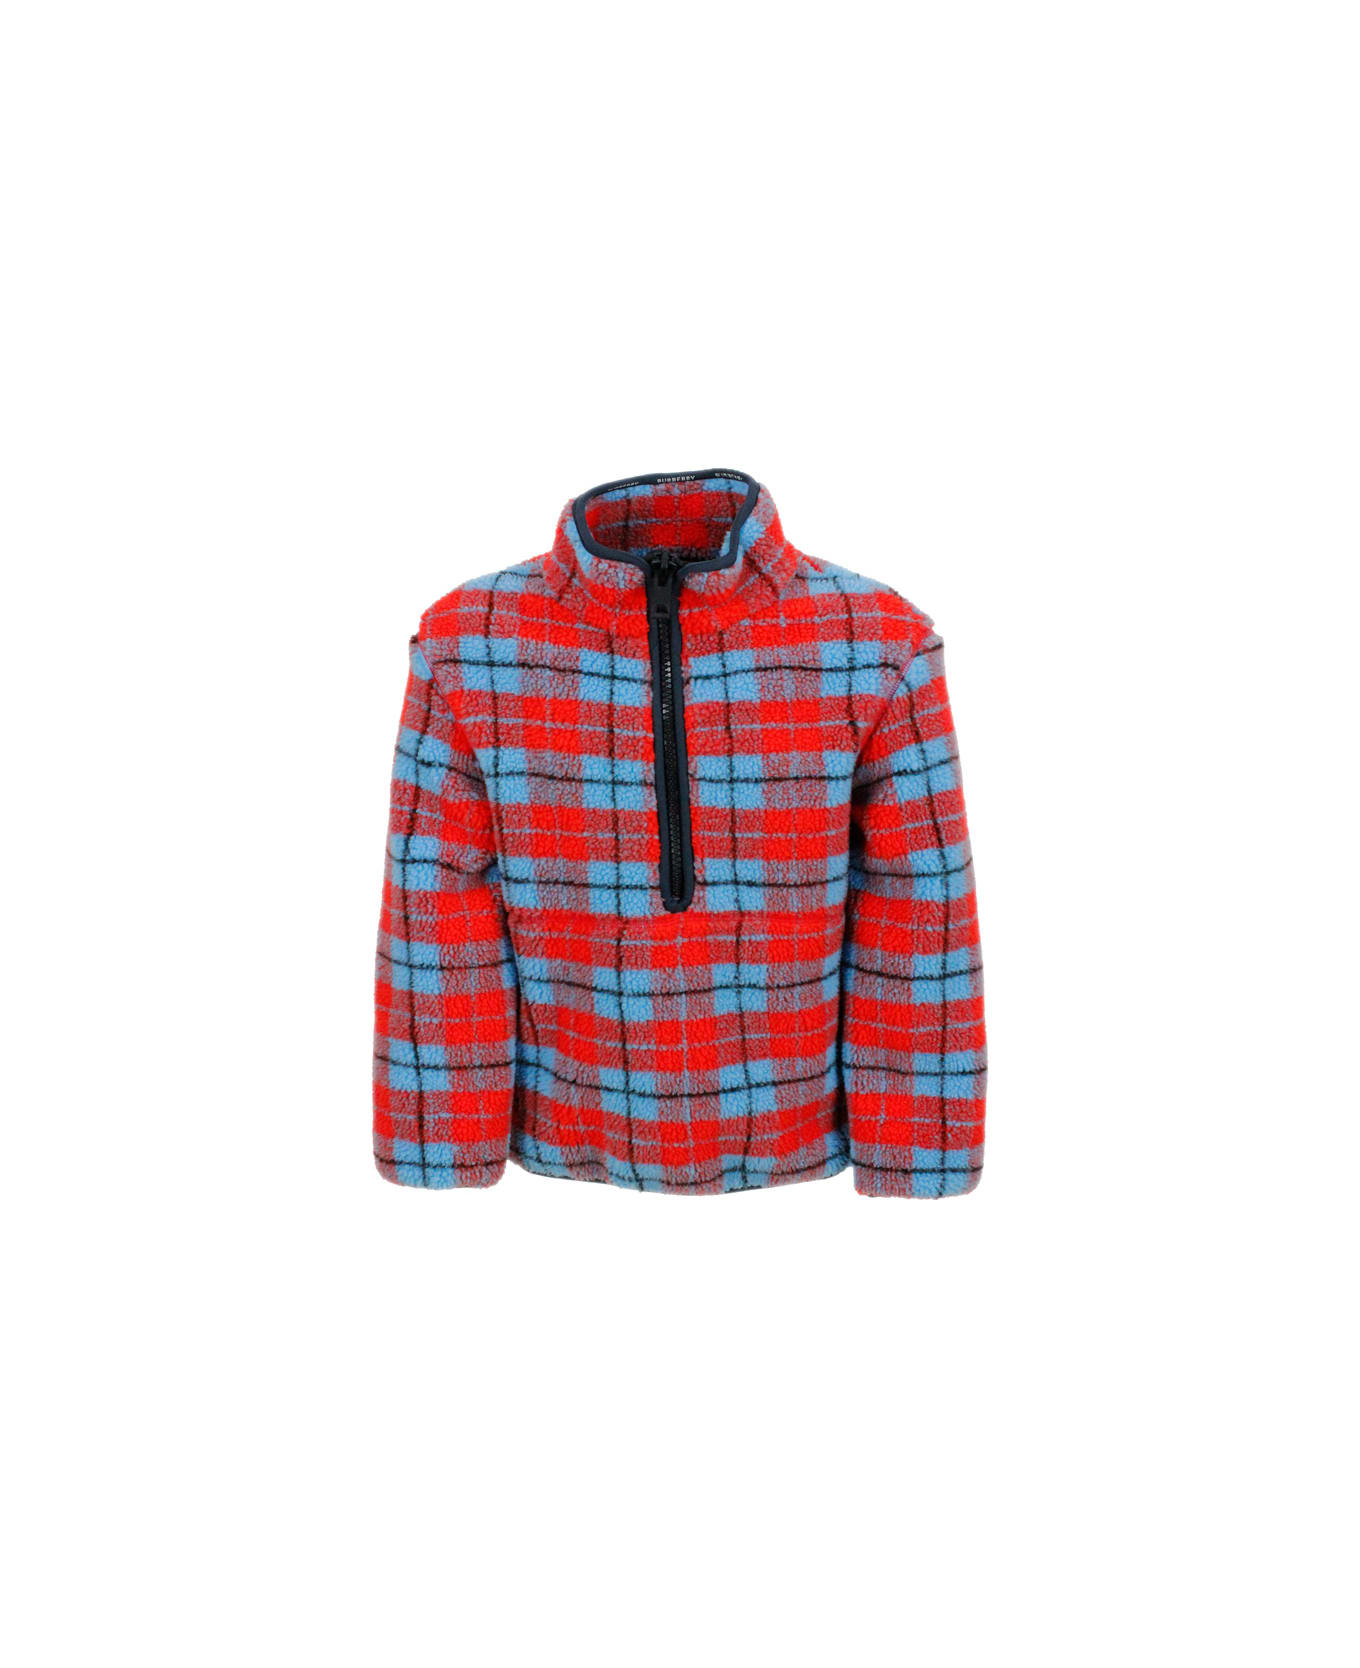 Burberry Jacket Made Of Cotton Fleece With Tartan Motif In Bright Colors And Half Zip Closure - Red コート＆ジャケット